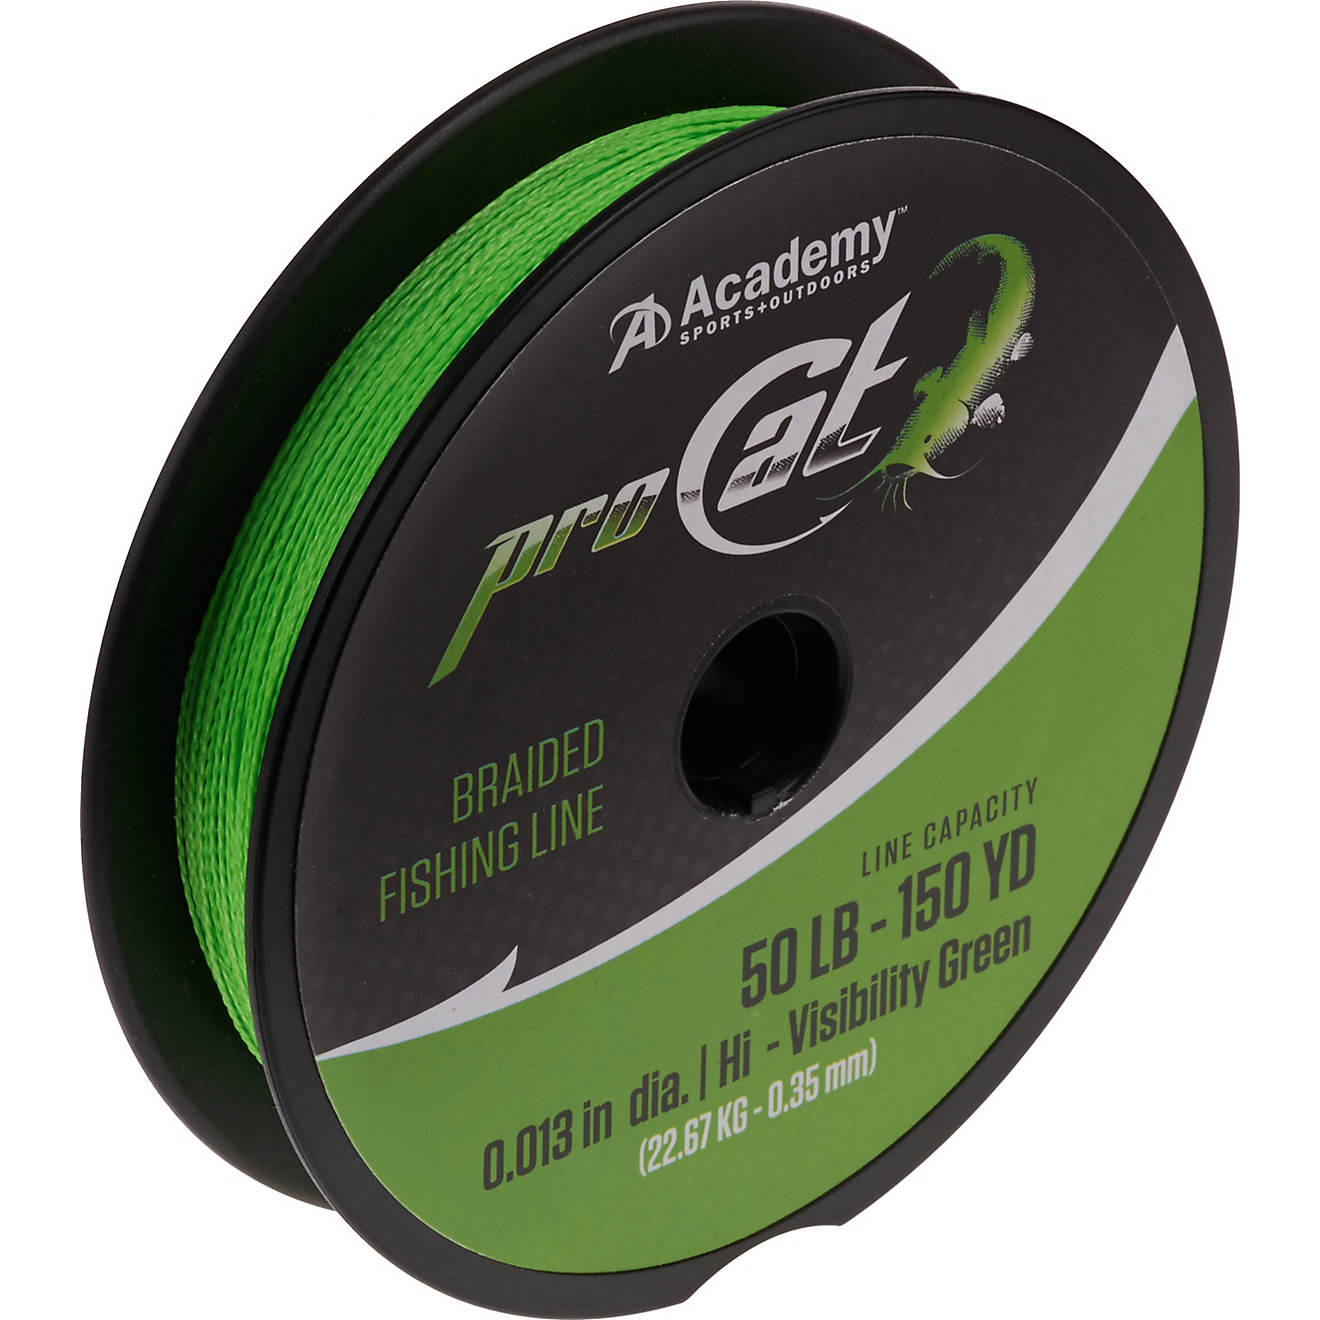 Pro Cat 150 yards Braided Fishing Line                                                                                           - view number 1